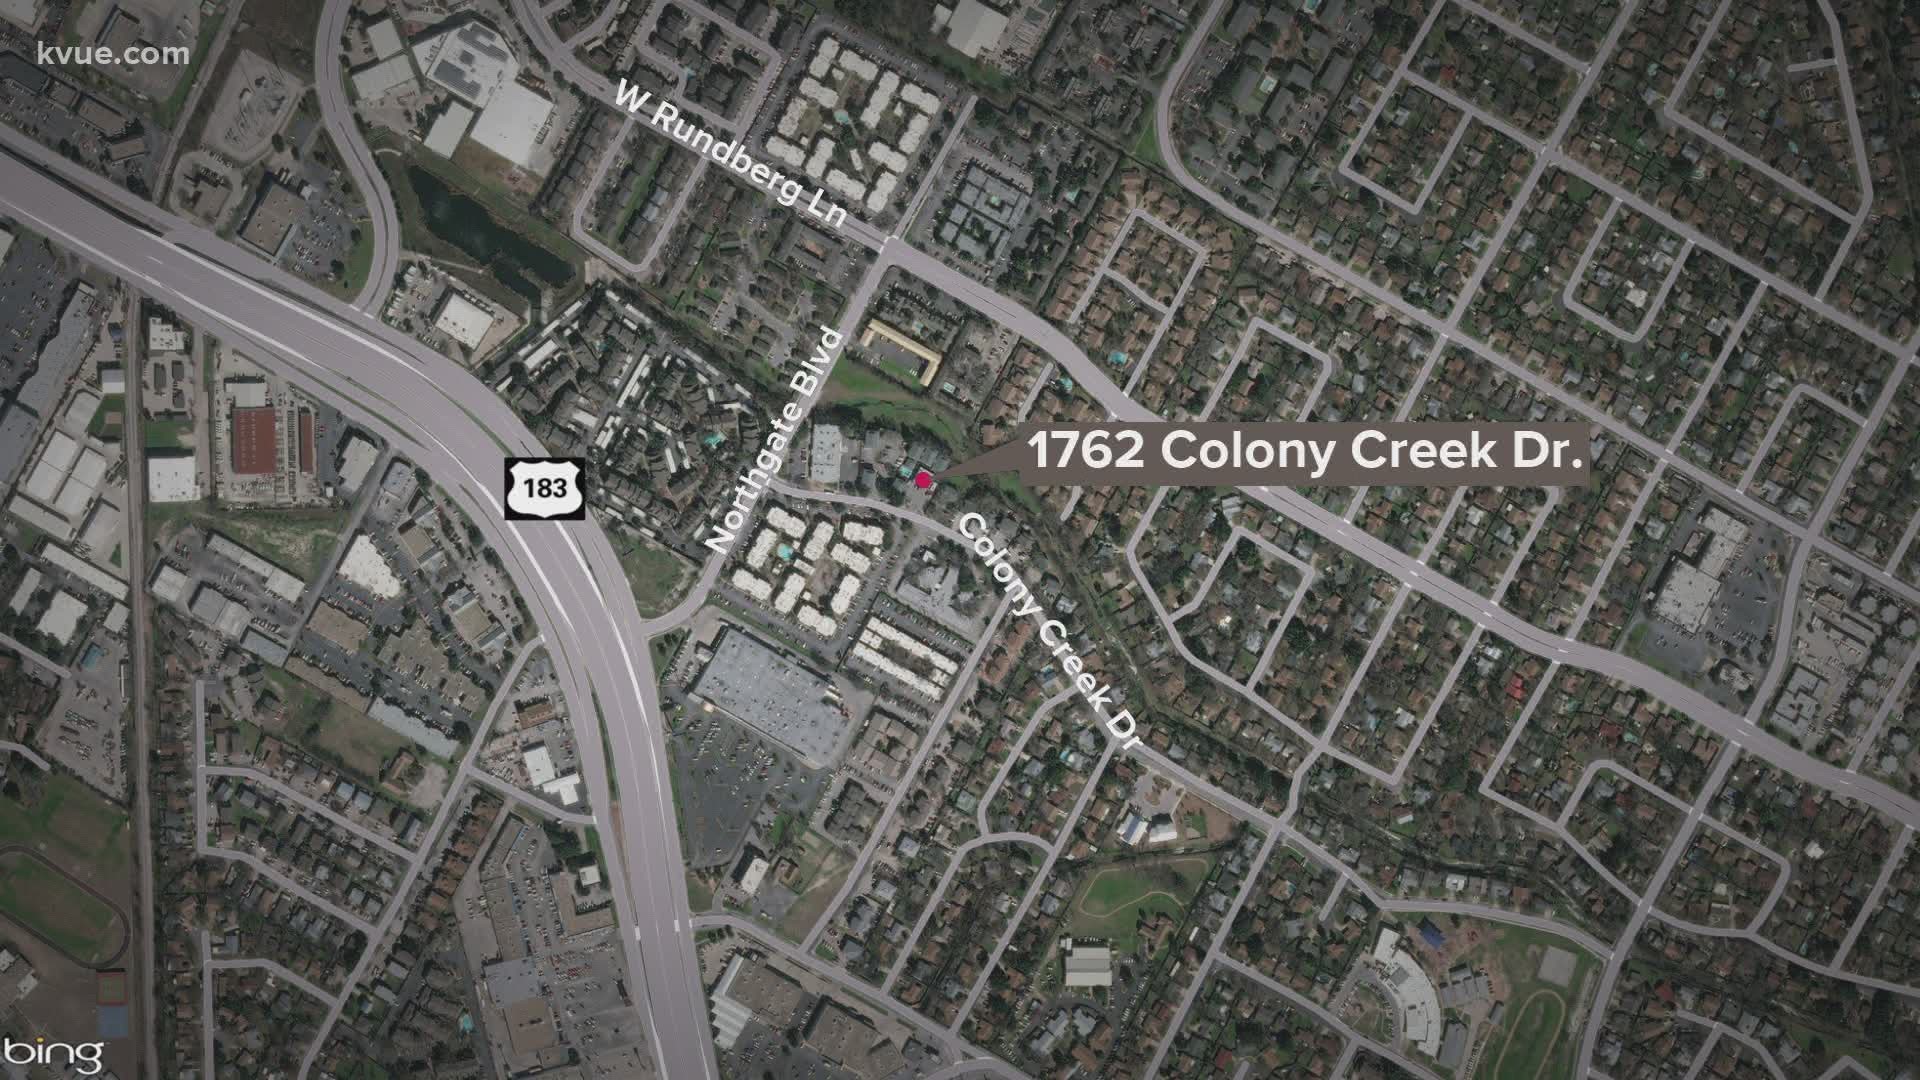 The shooting occurred Saturday night on the sidewalk of Colony Creek Drive.